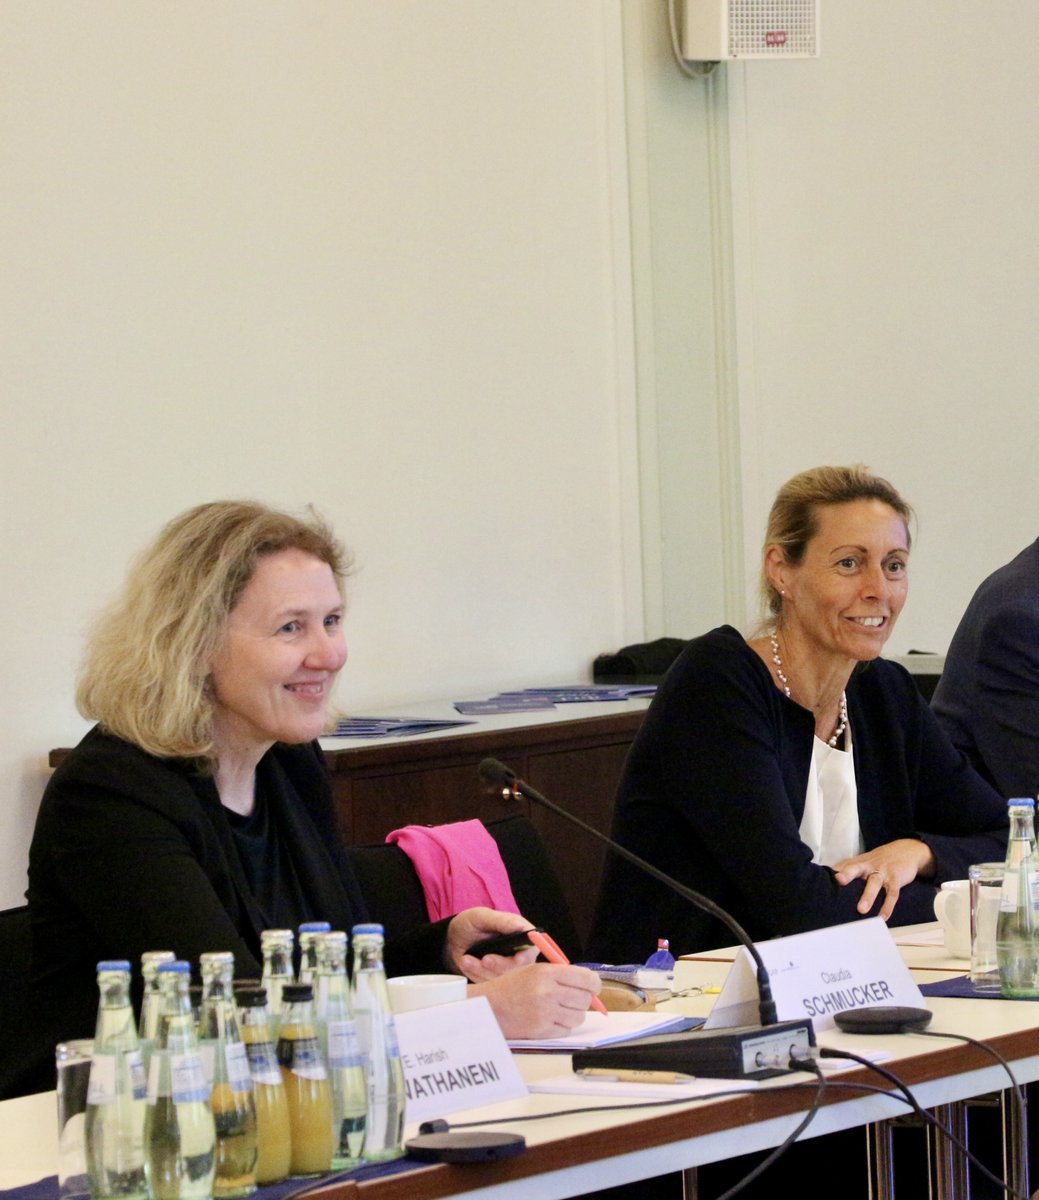 This morning, the Aspen Institute Germany and the @dgapev welcomed a round of distinguished experts for a conference on the future of global trade. We would like to thank all speakers and attendees for the thought-provoking discussions.